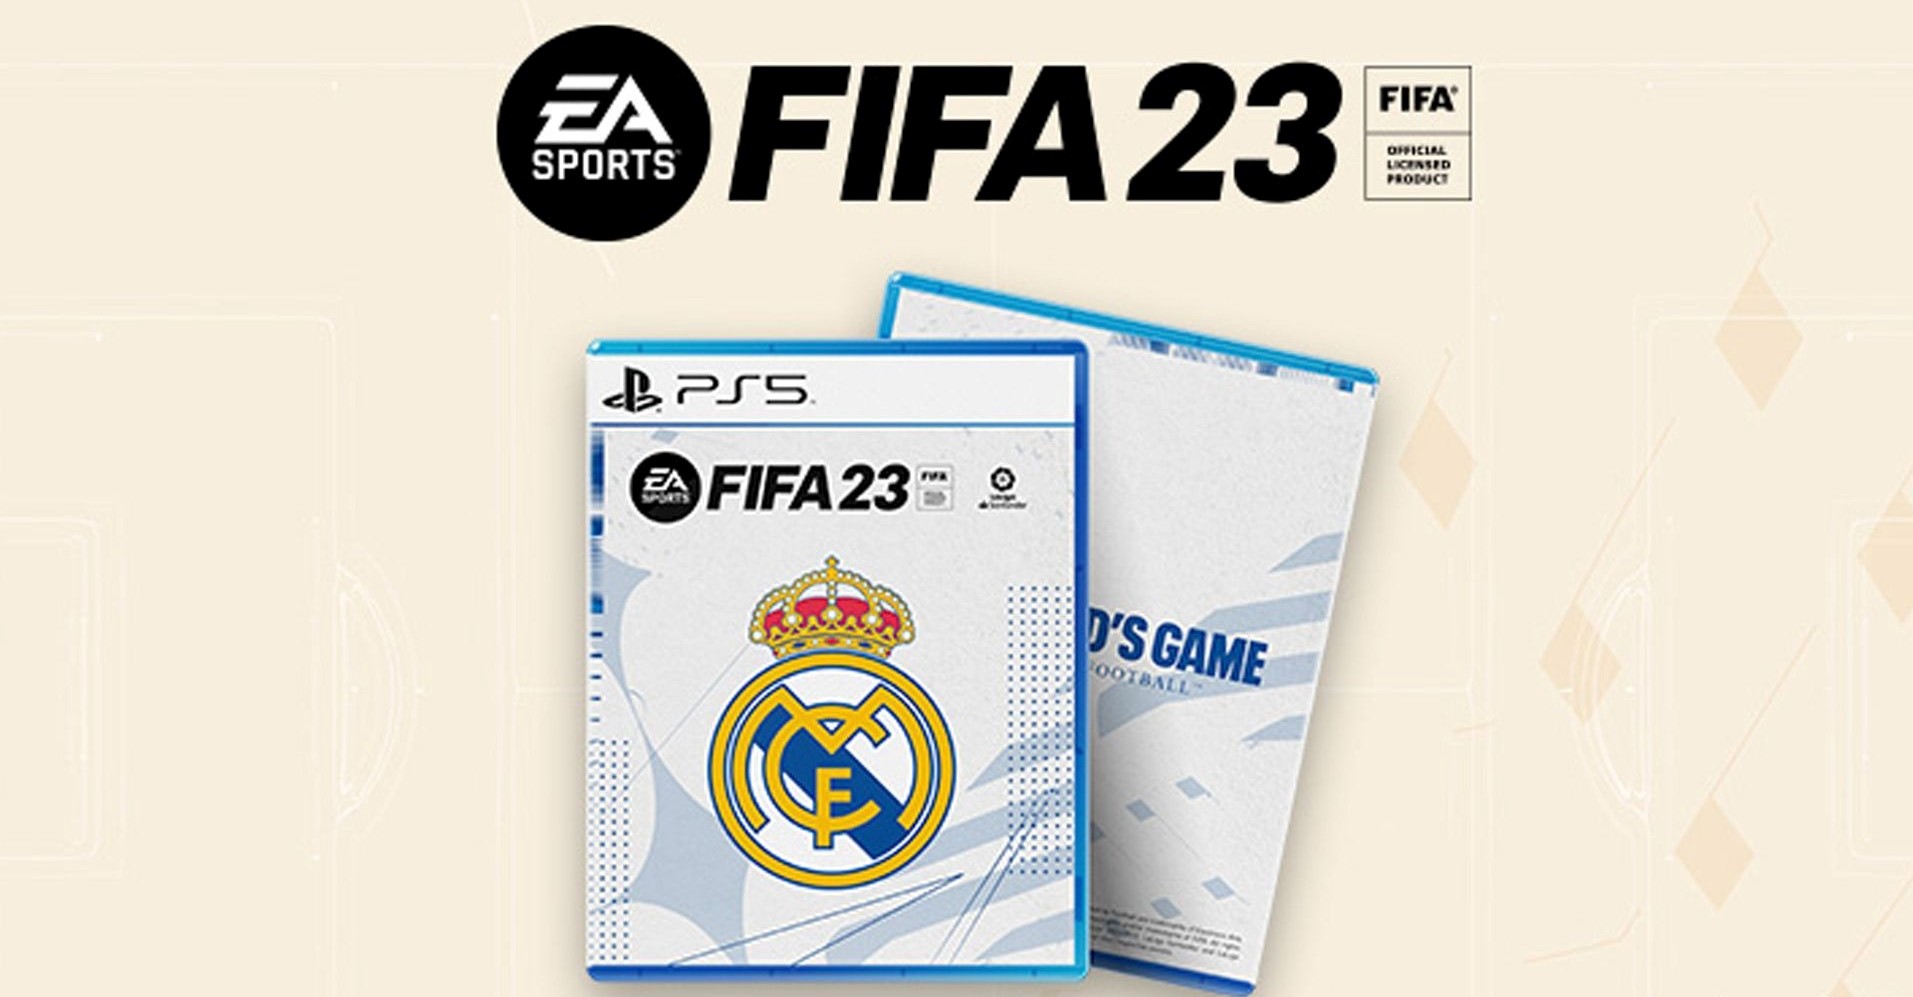 FIFA 23 now available with a Real Madrid cover | Madridistanews.com